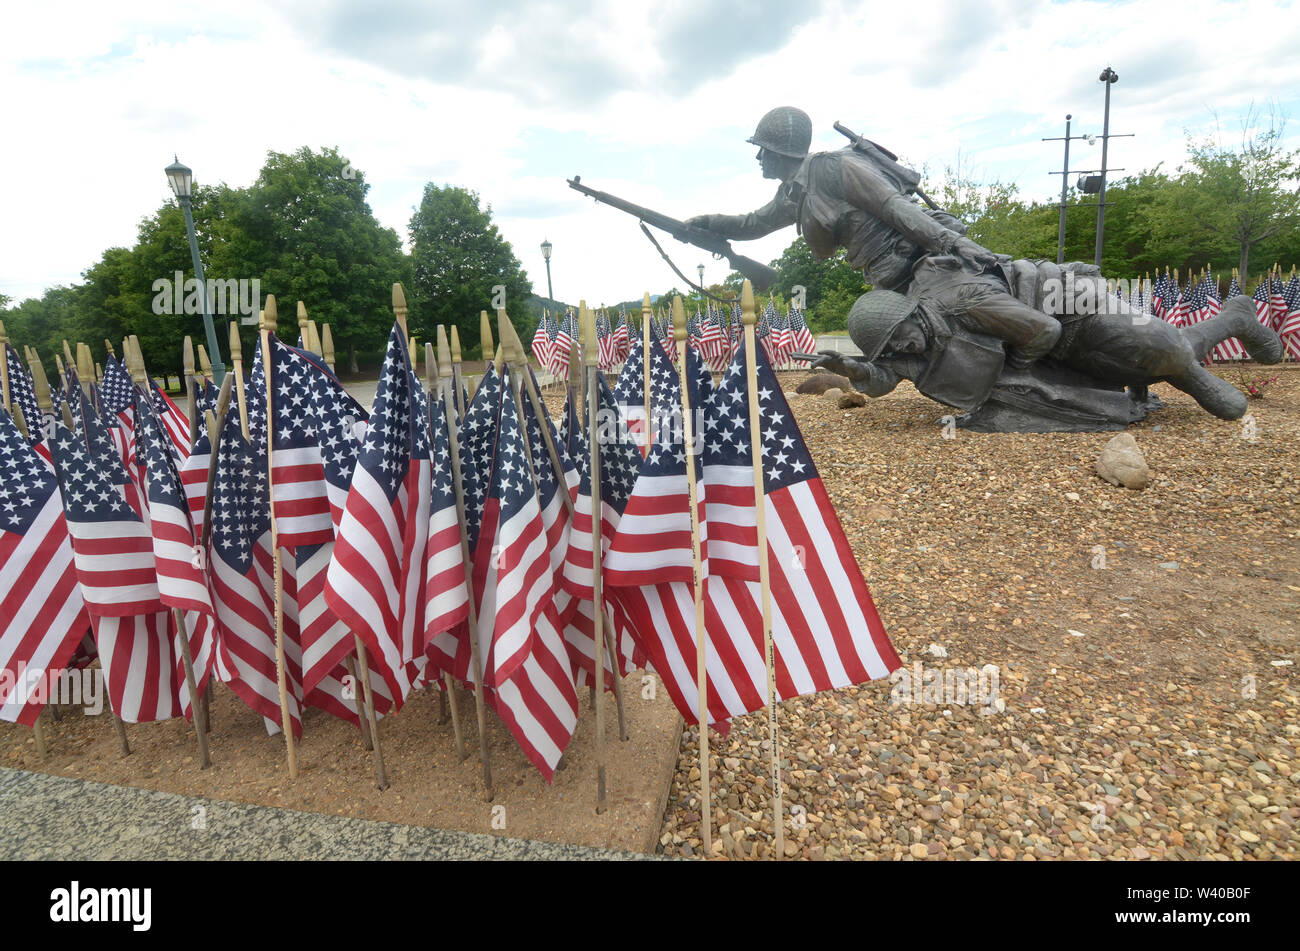 With small American flags displayed in the foreground, a statue of a soldier helping a wounded comrade at the D-Day Memorial in Virginia. Stock Photo